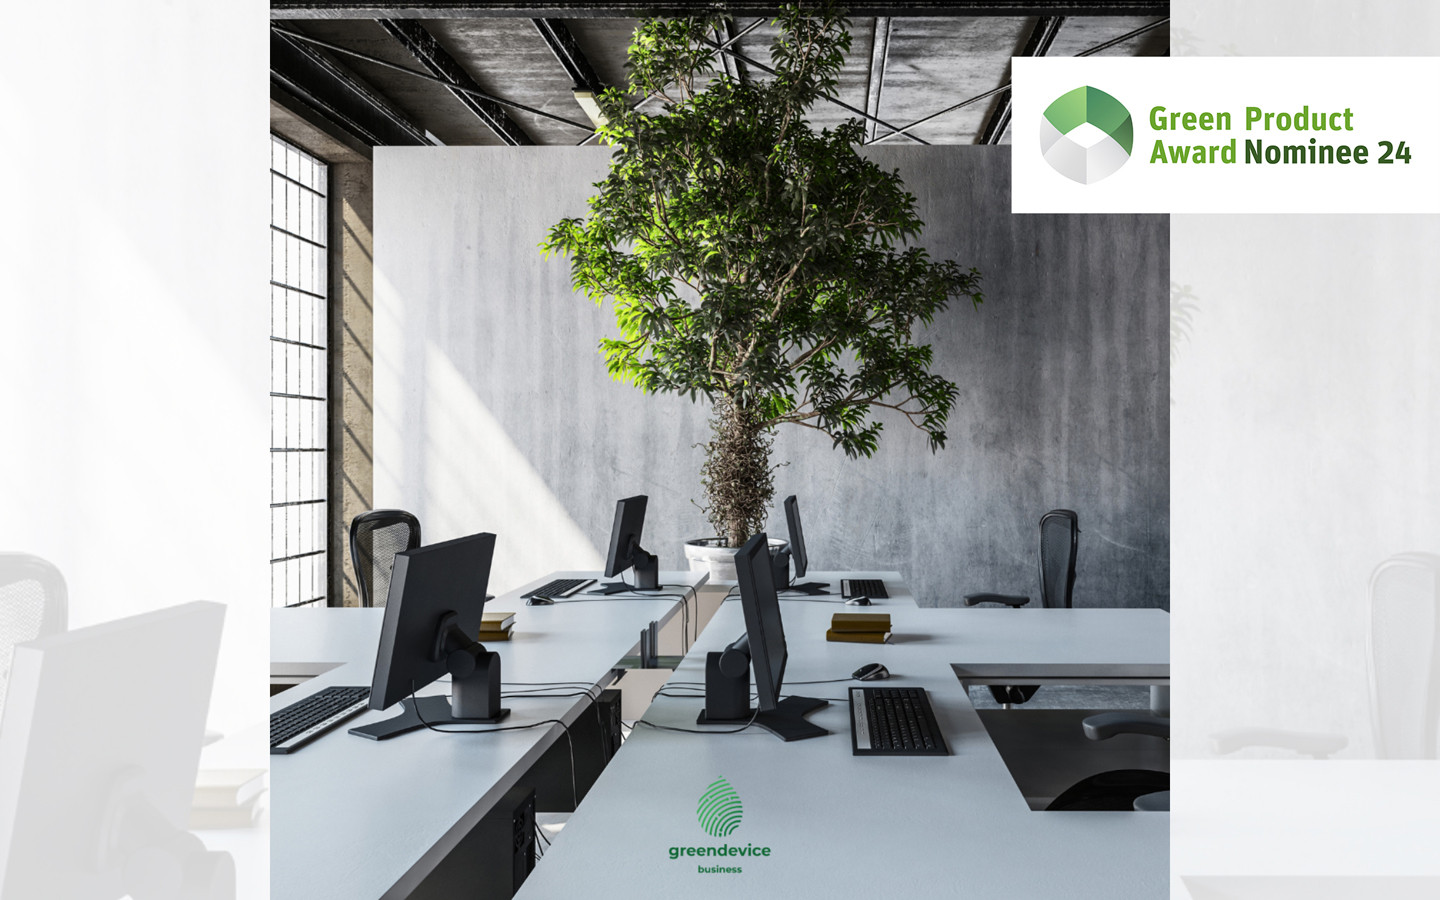 greendevice business